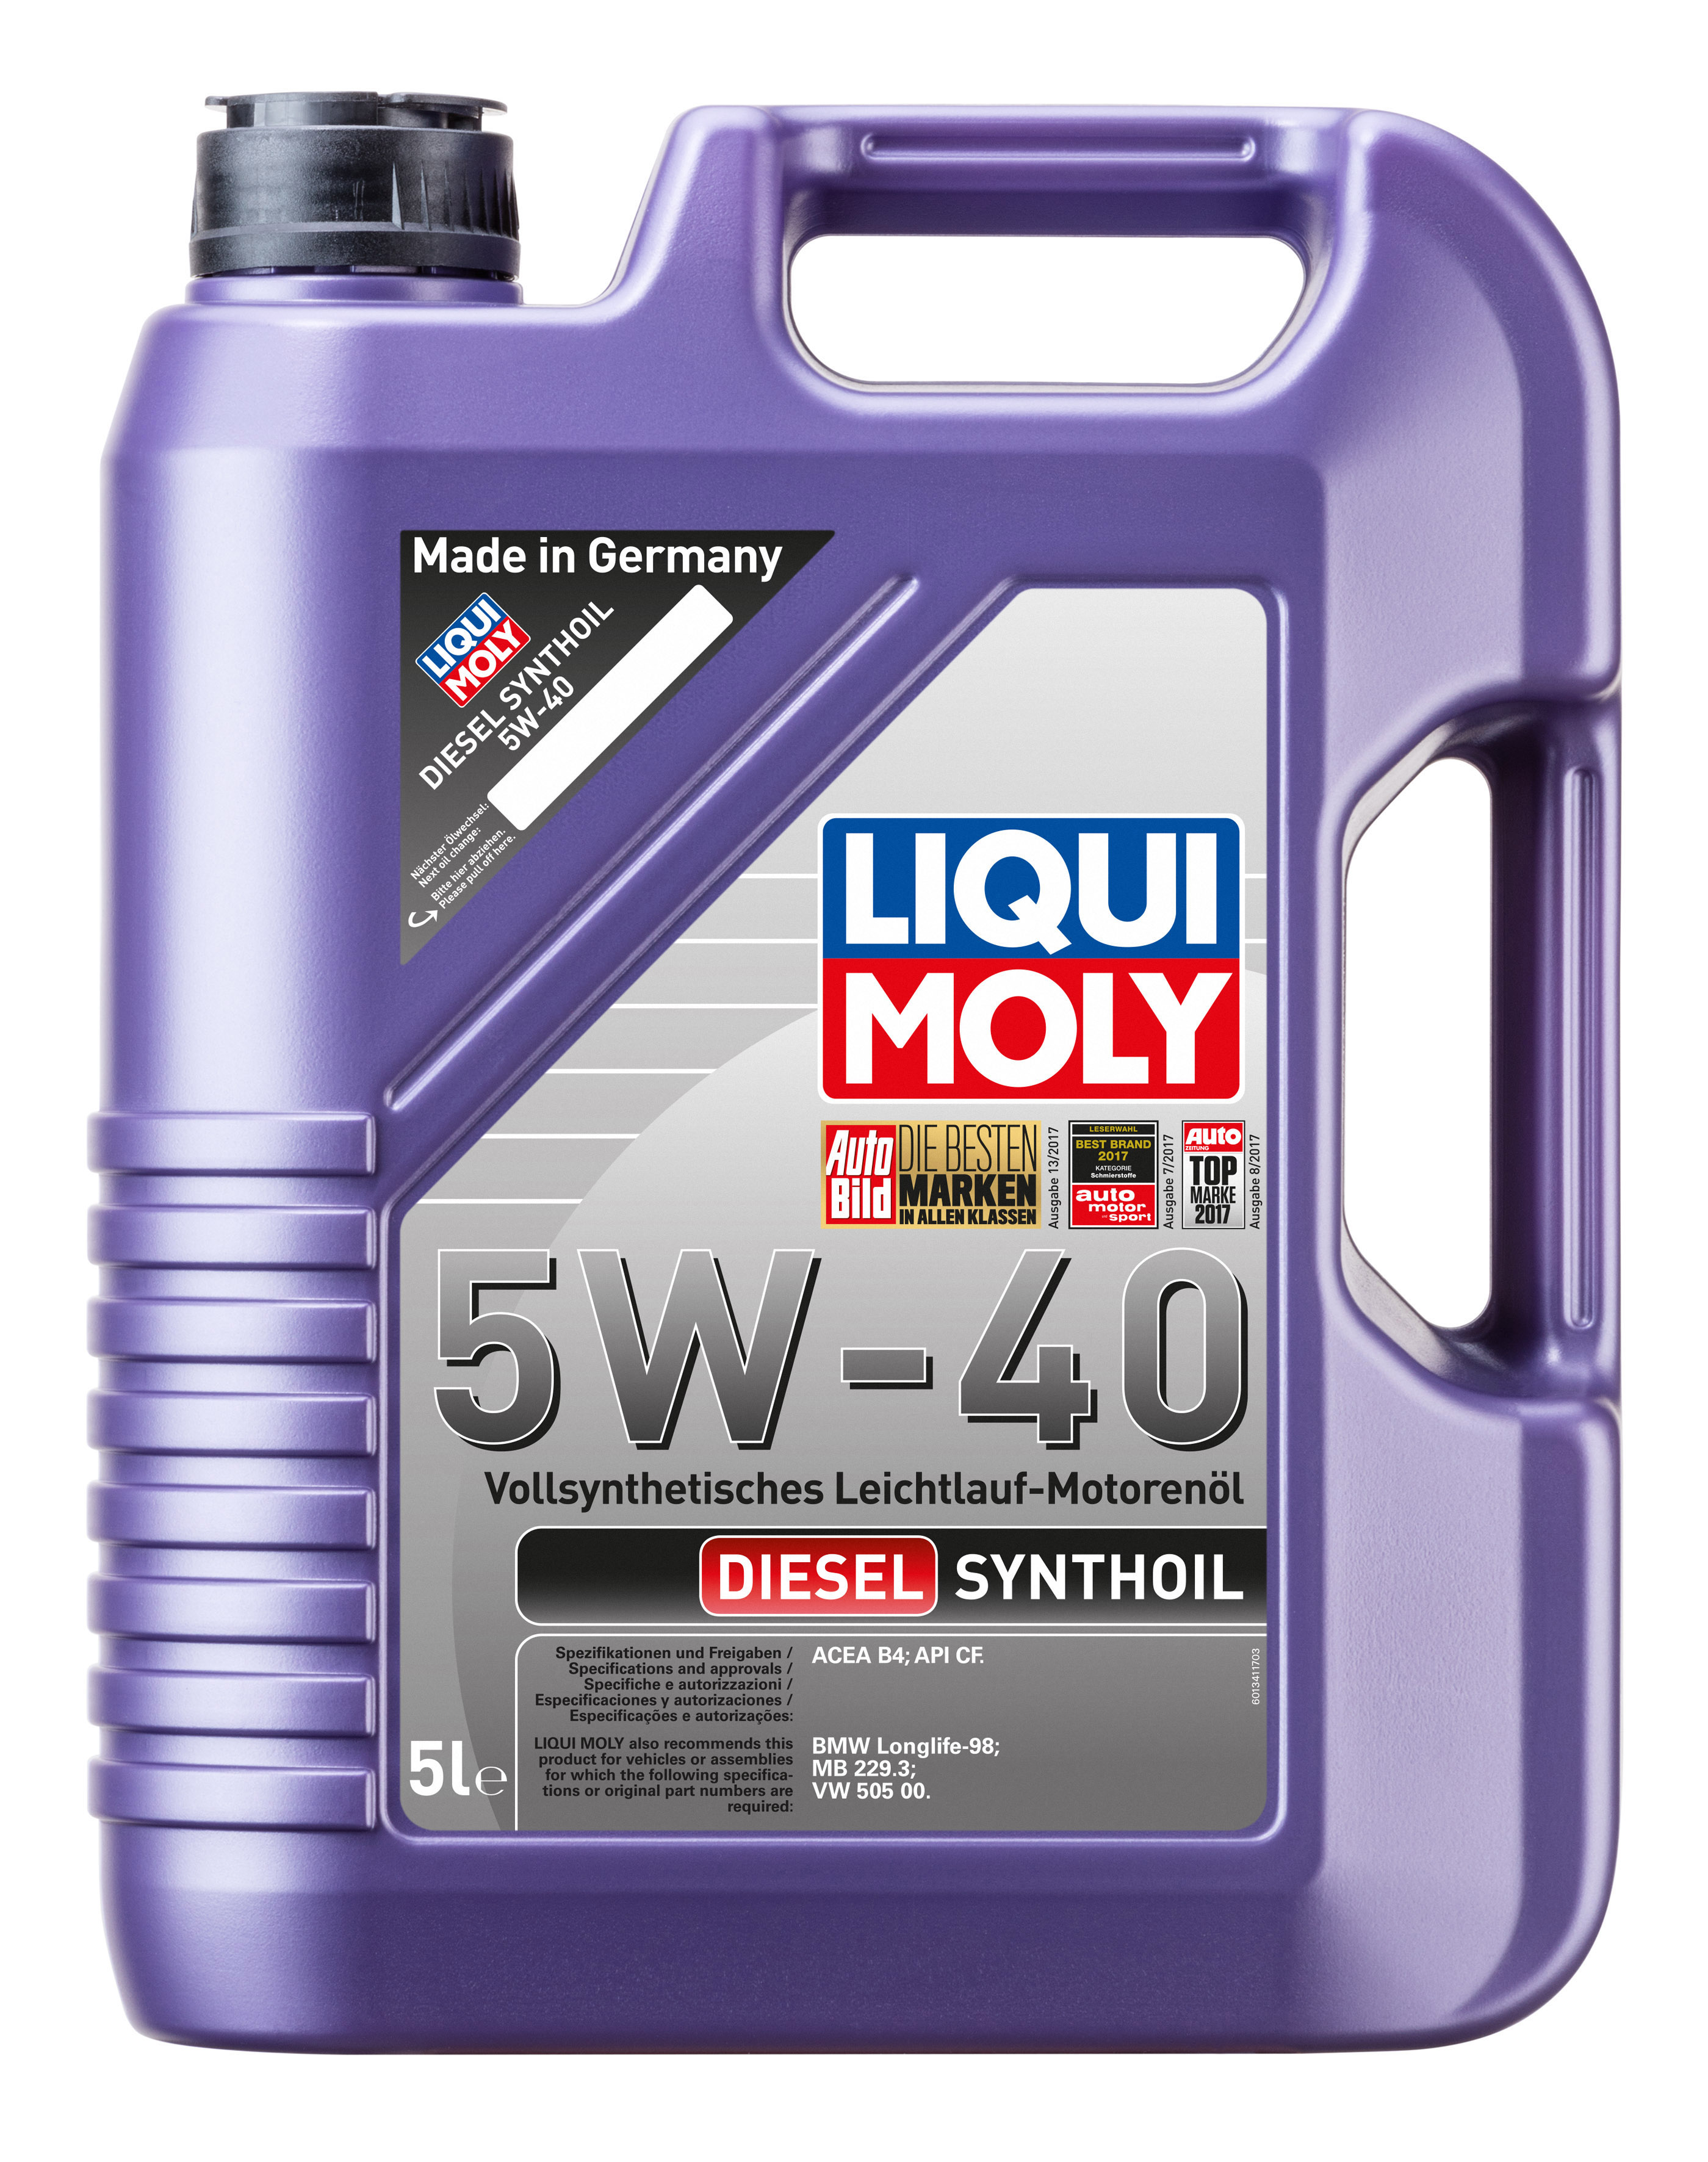 5w-40 Diesel Synthoil, 5л (pao синт.мотор.масло) - Liqui Moly 1927